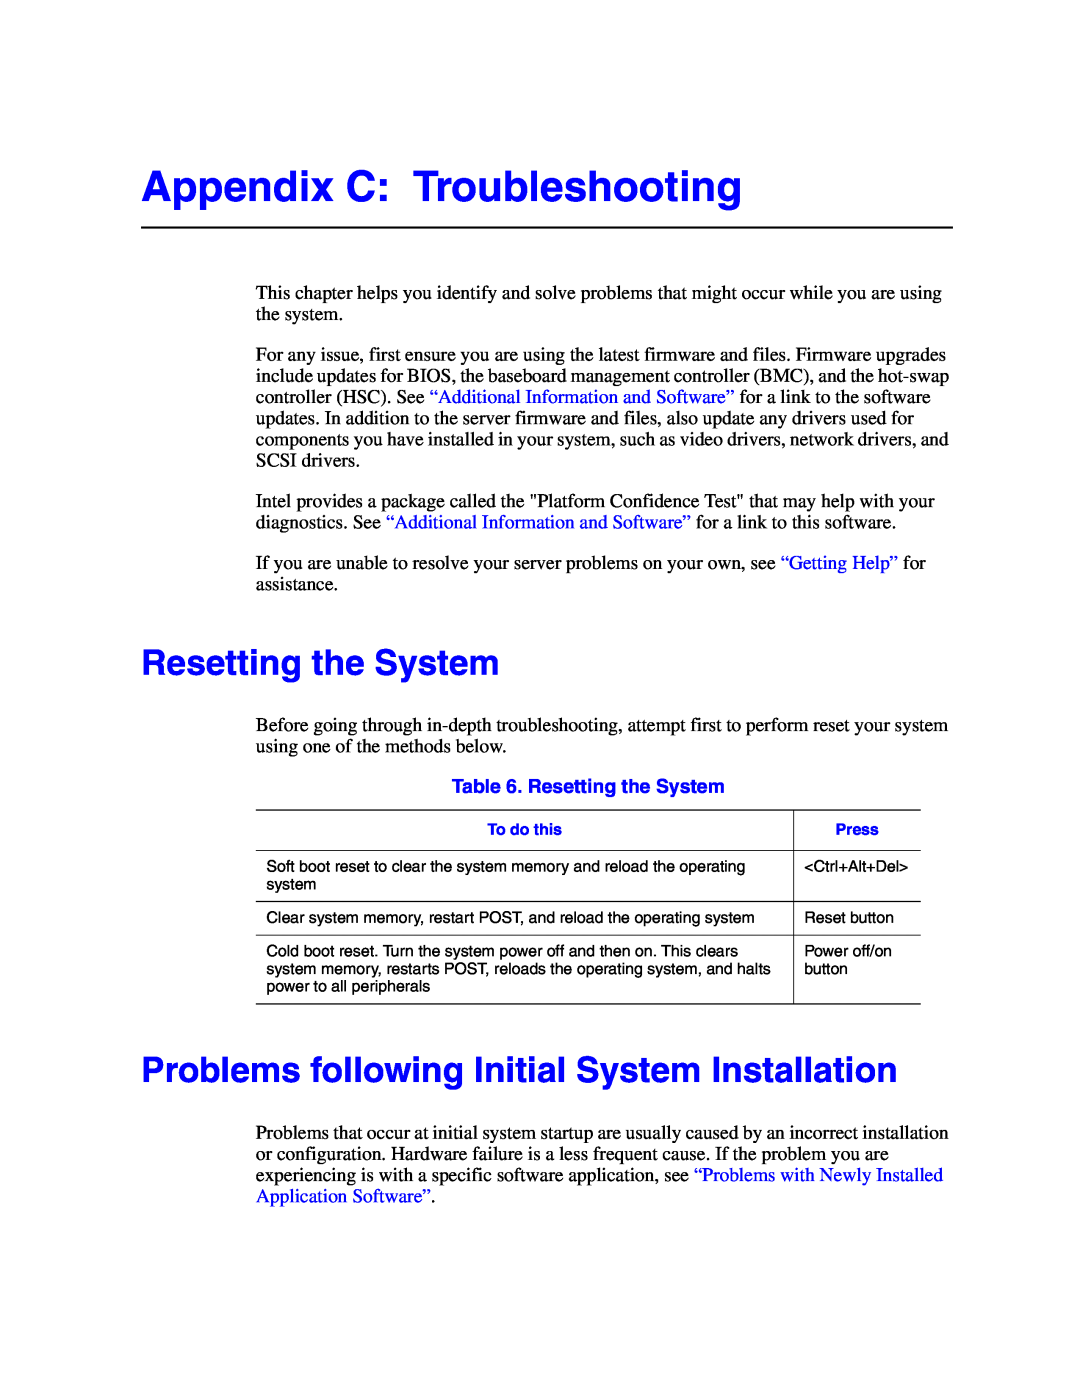 Intel S5000VSA manual Appendix C Troubleshooting, Resetting the System, Problems following Initial System Installation 